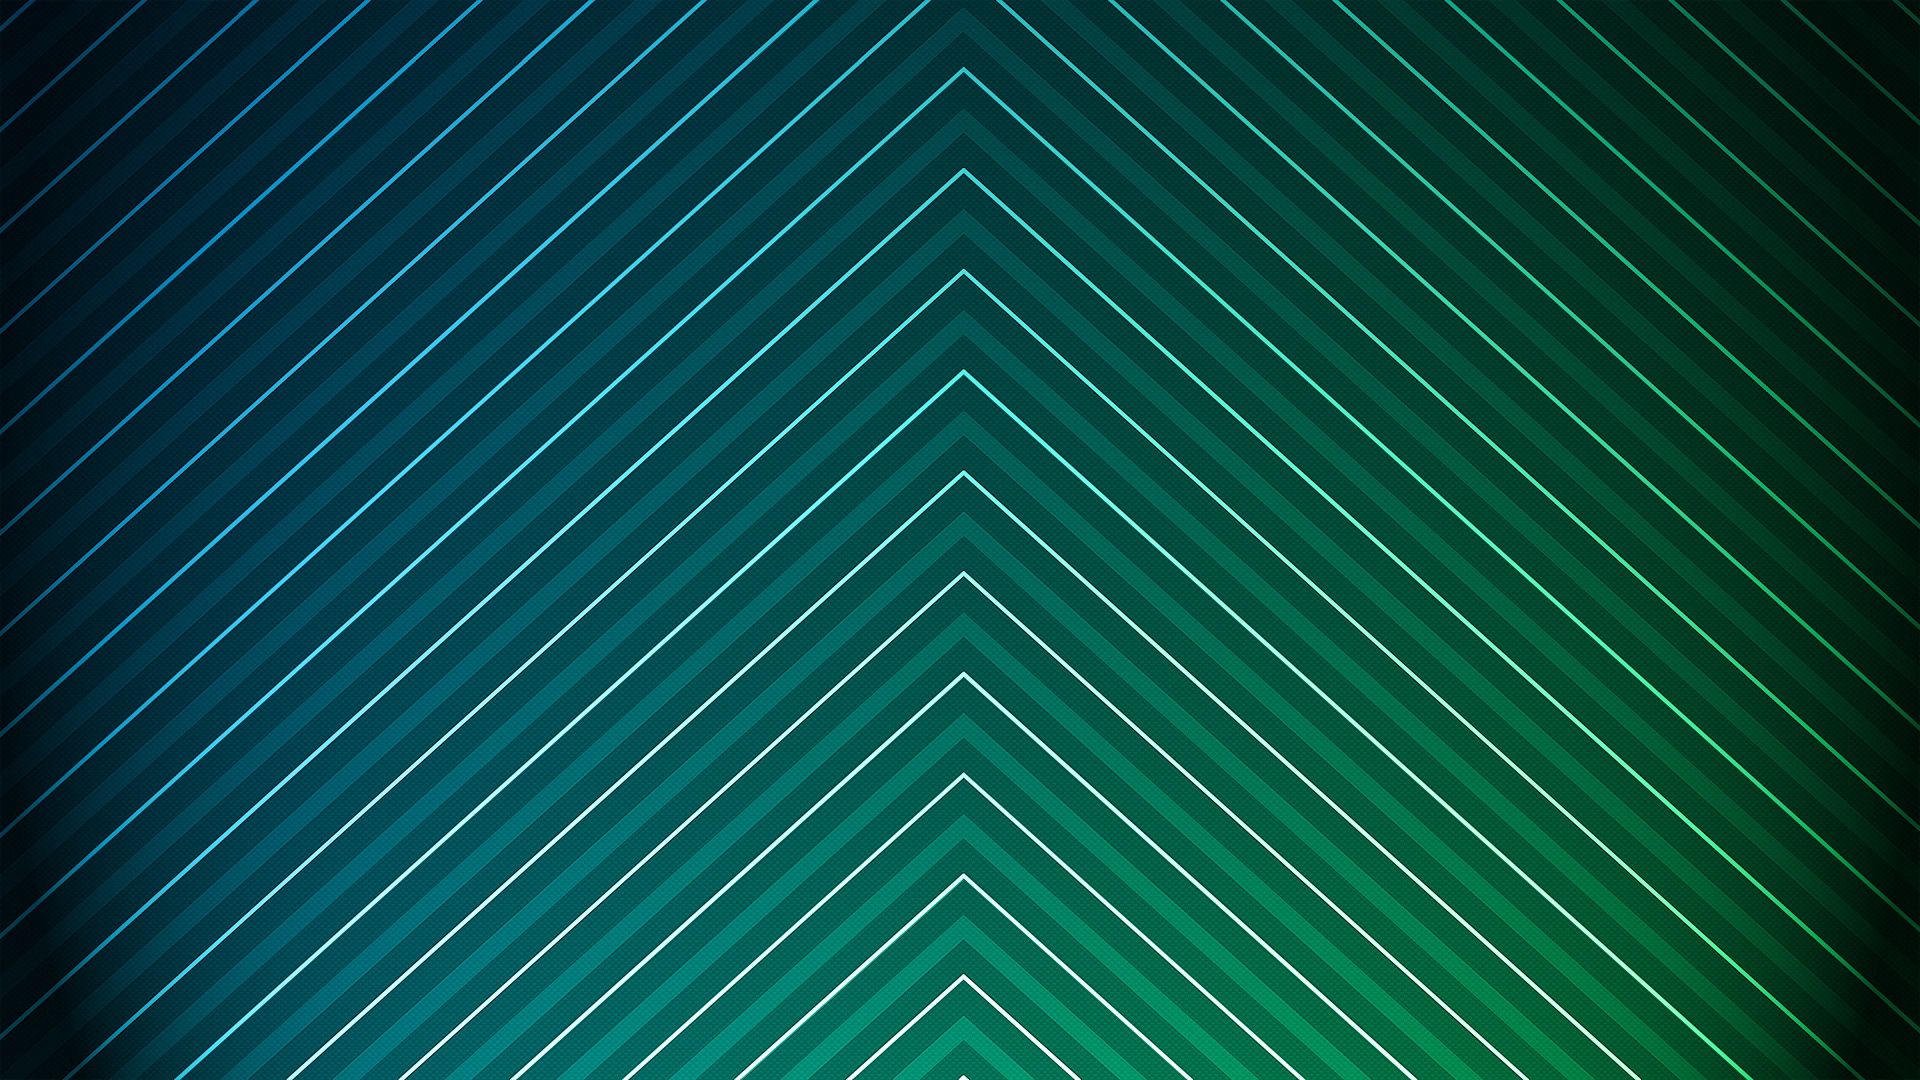  HD Wallpaper for Phone